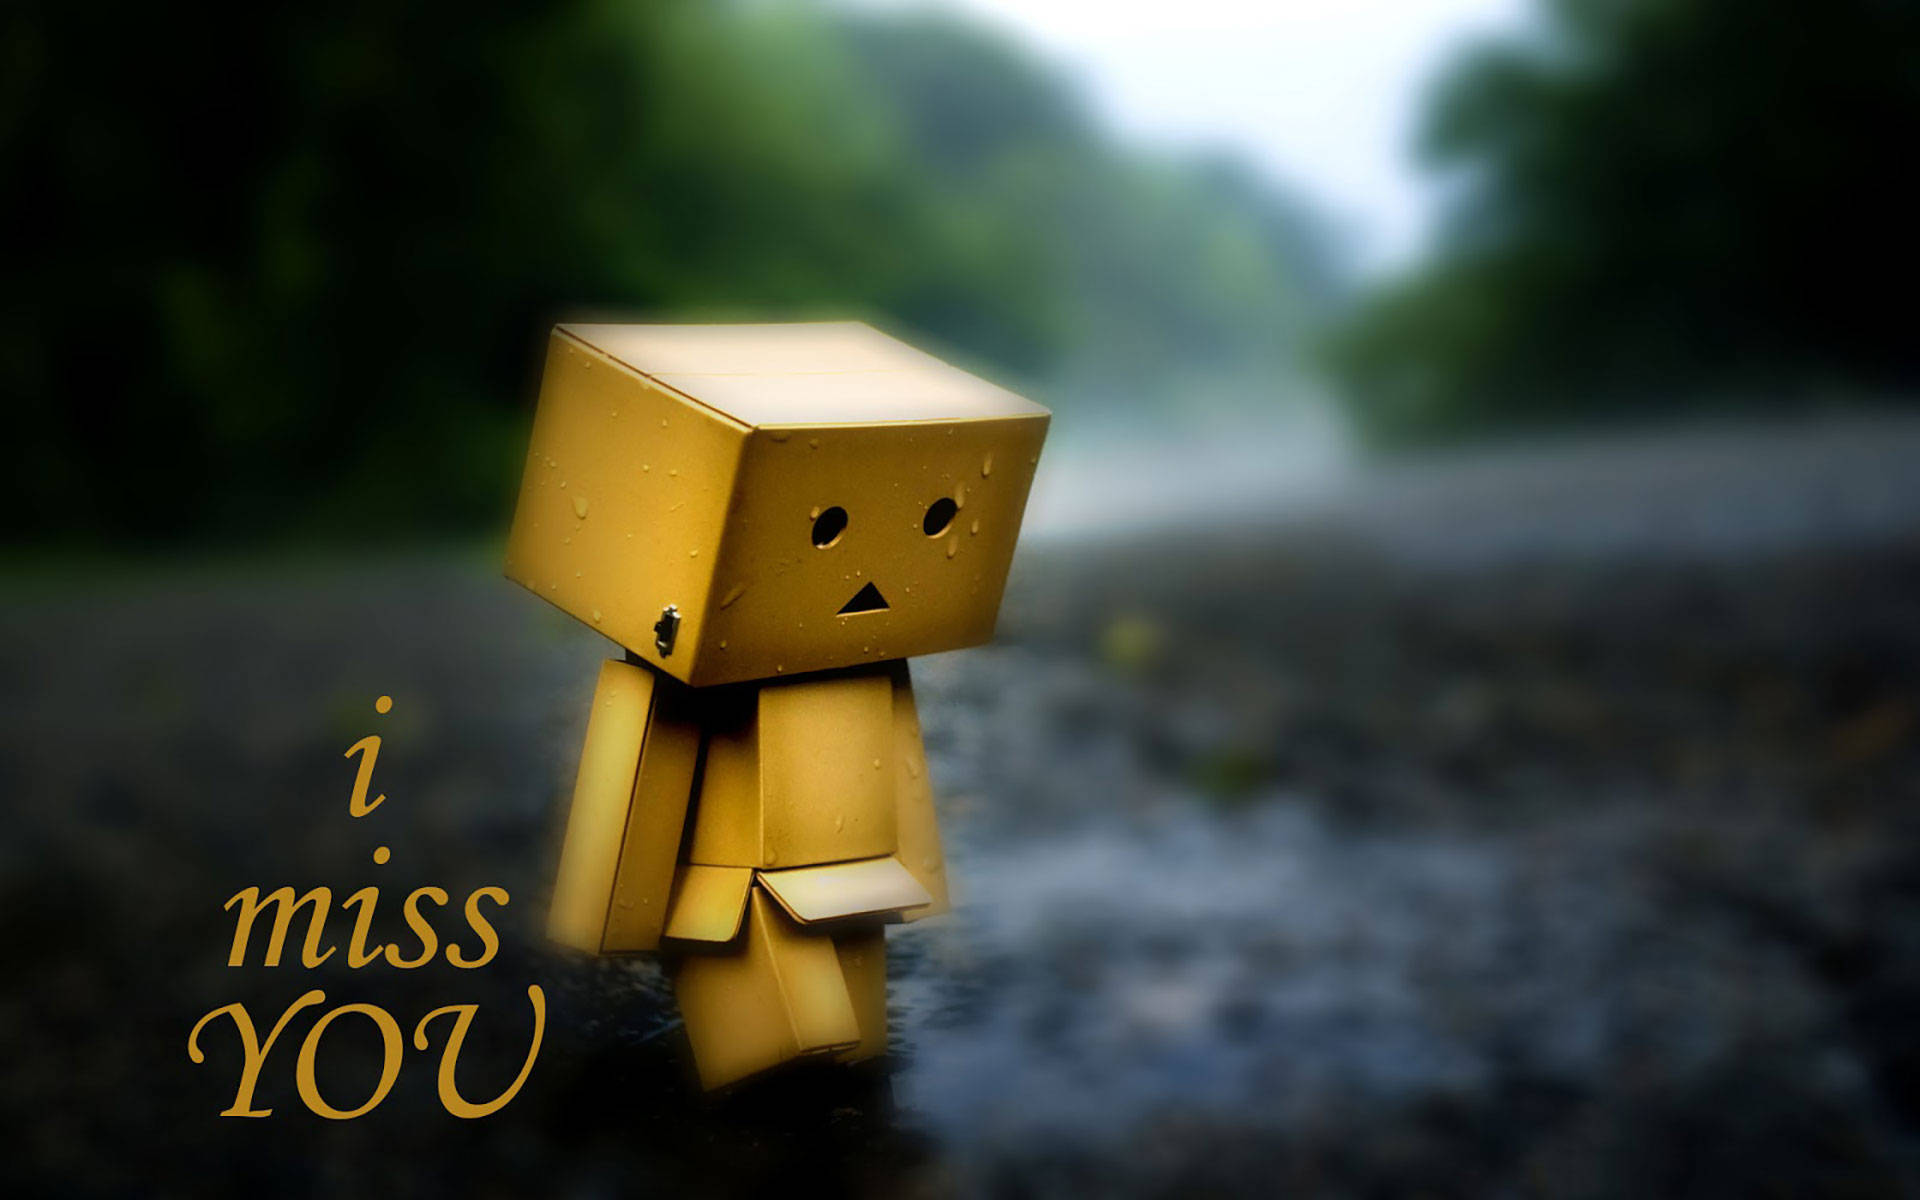 Free Missing You Wallpaper Downloads, [100+] Missing You Wallpapers for  FREE 